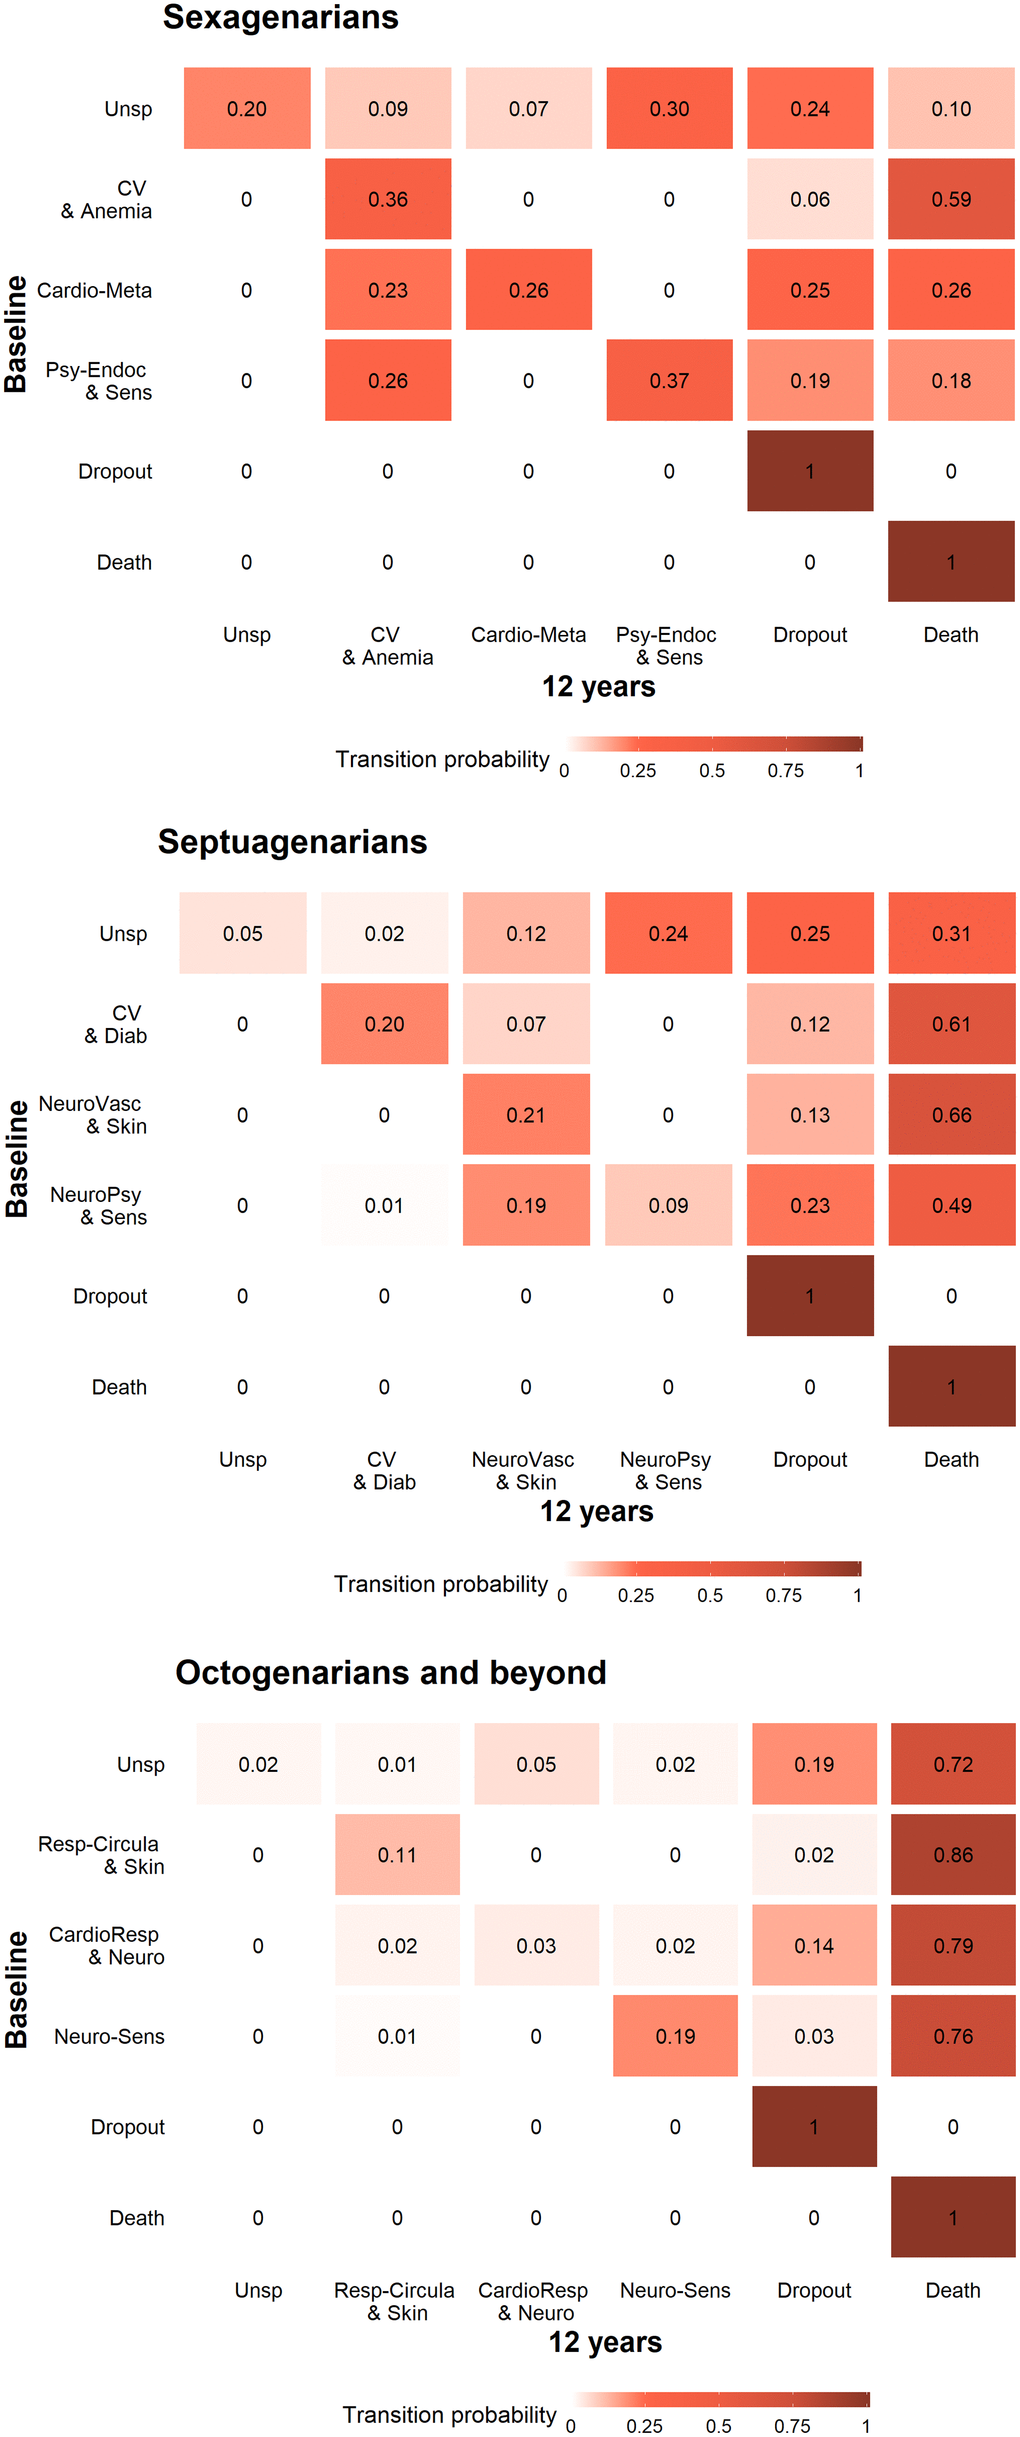 Transition probability matrices by age group from baseline to the 12-year follow-up (N=3,363). Sexagenarians: Unspecific (Unsp); Cardiovascular and anemia (CV and Anemia); Cardio-metabolic (Cardio-Meta) and Psychiatric-endocrine and sensorial (Psy-Endoc and Sens). Septuagenarians: Unspecific (Unsp); Cardiovascular and diabetes (CV and Diab); Neuro-vascular and skin-sensorial (NeuroVasc and Skin); and Neuro-psychiatric and sensorial (NeuroPsy and Sens). Octogenarians and beyond: Unspecific (Unsp); Respiratory-circulatory and skin (Resp-Circula and Skin); Cardio-respiratory and neurological (CardioResp and Neuro); and Neuro-sensorial (Neuro-Sens).